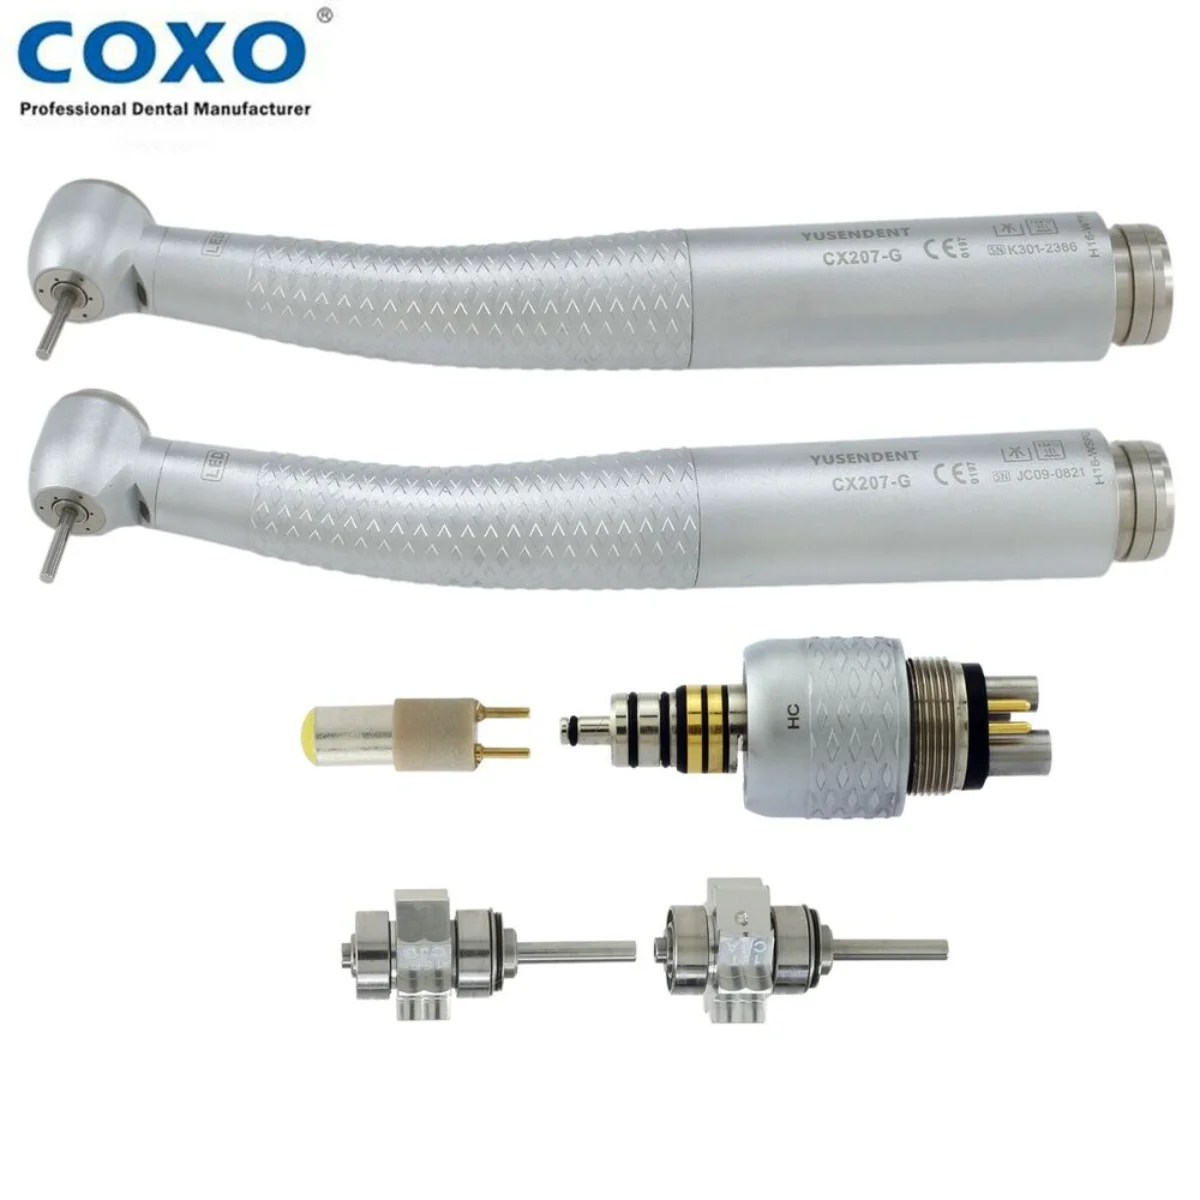 COXO Dental Fiber Optic LED High Speed Handpiece For W/H Roto Quick Coupling